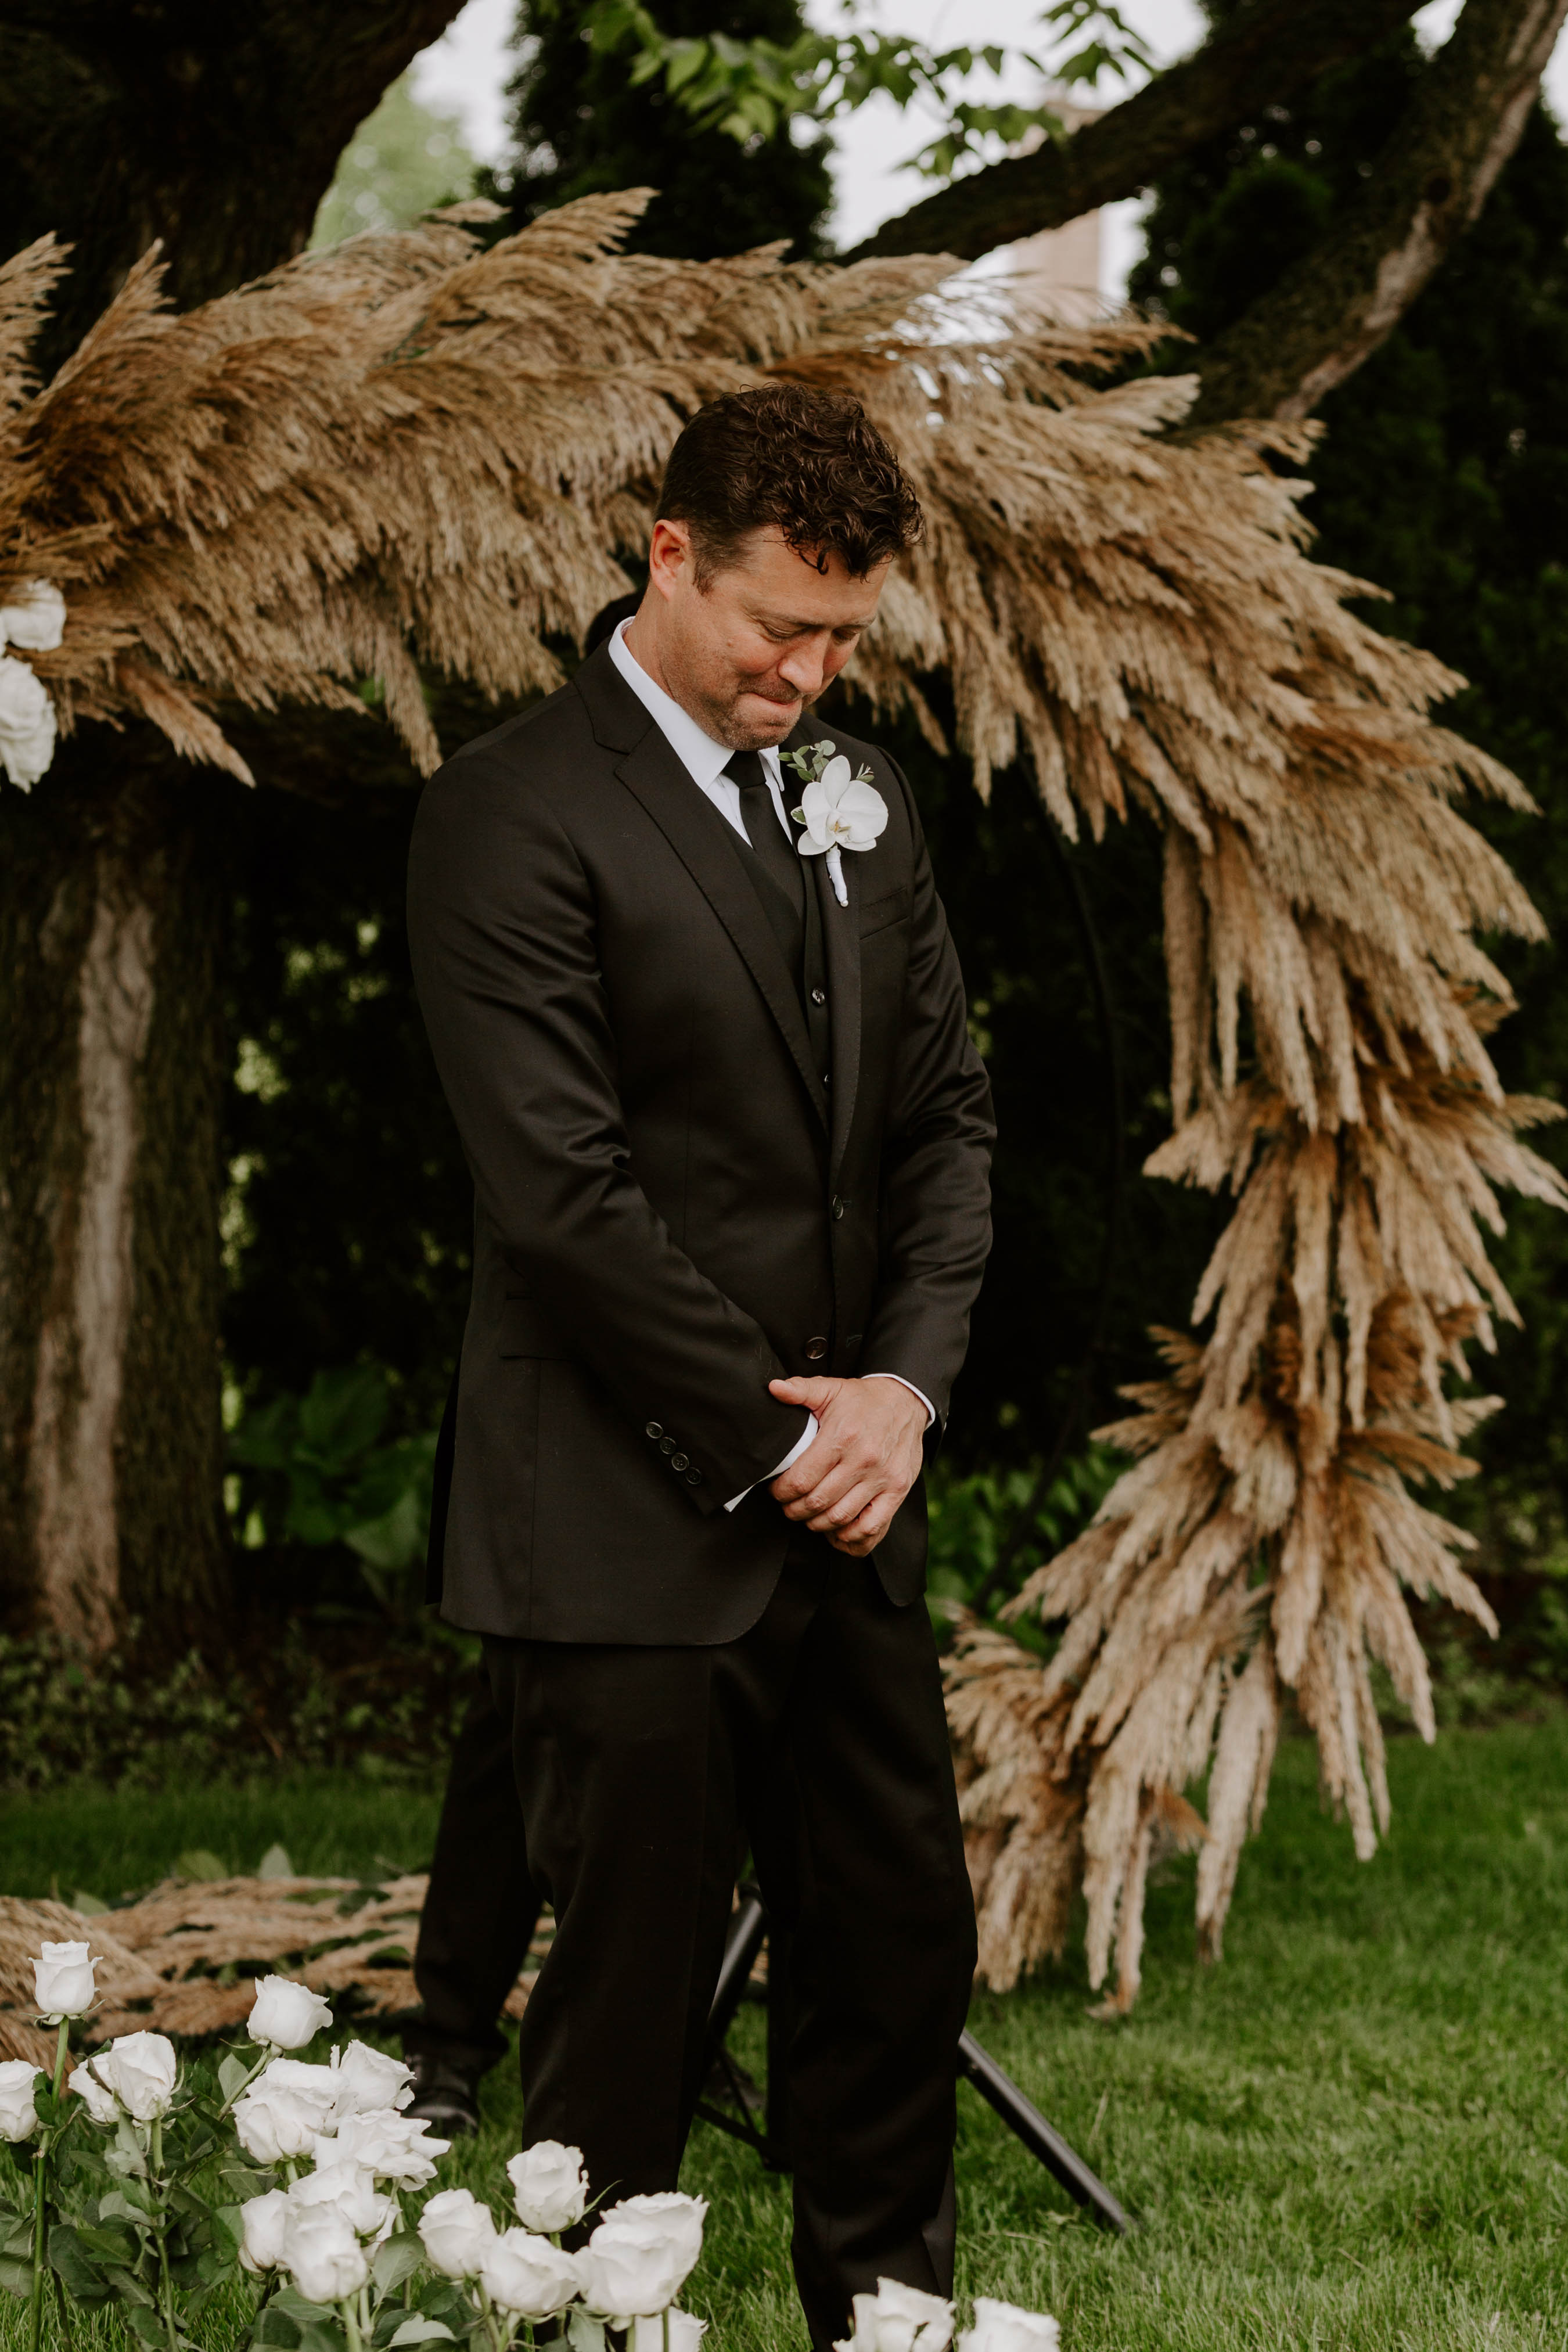 Groom seeing bride as she is walking down the aisle for the first time